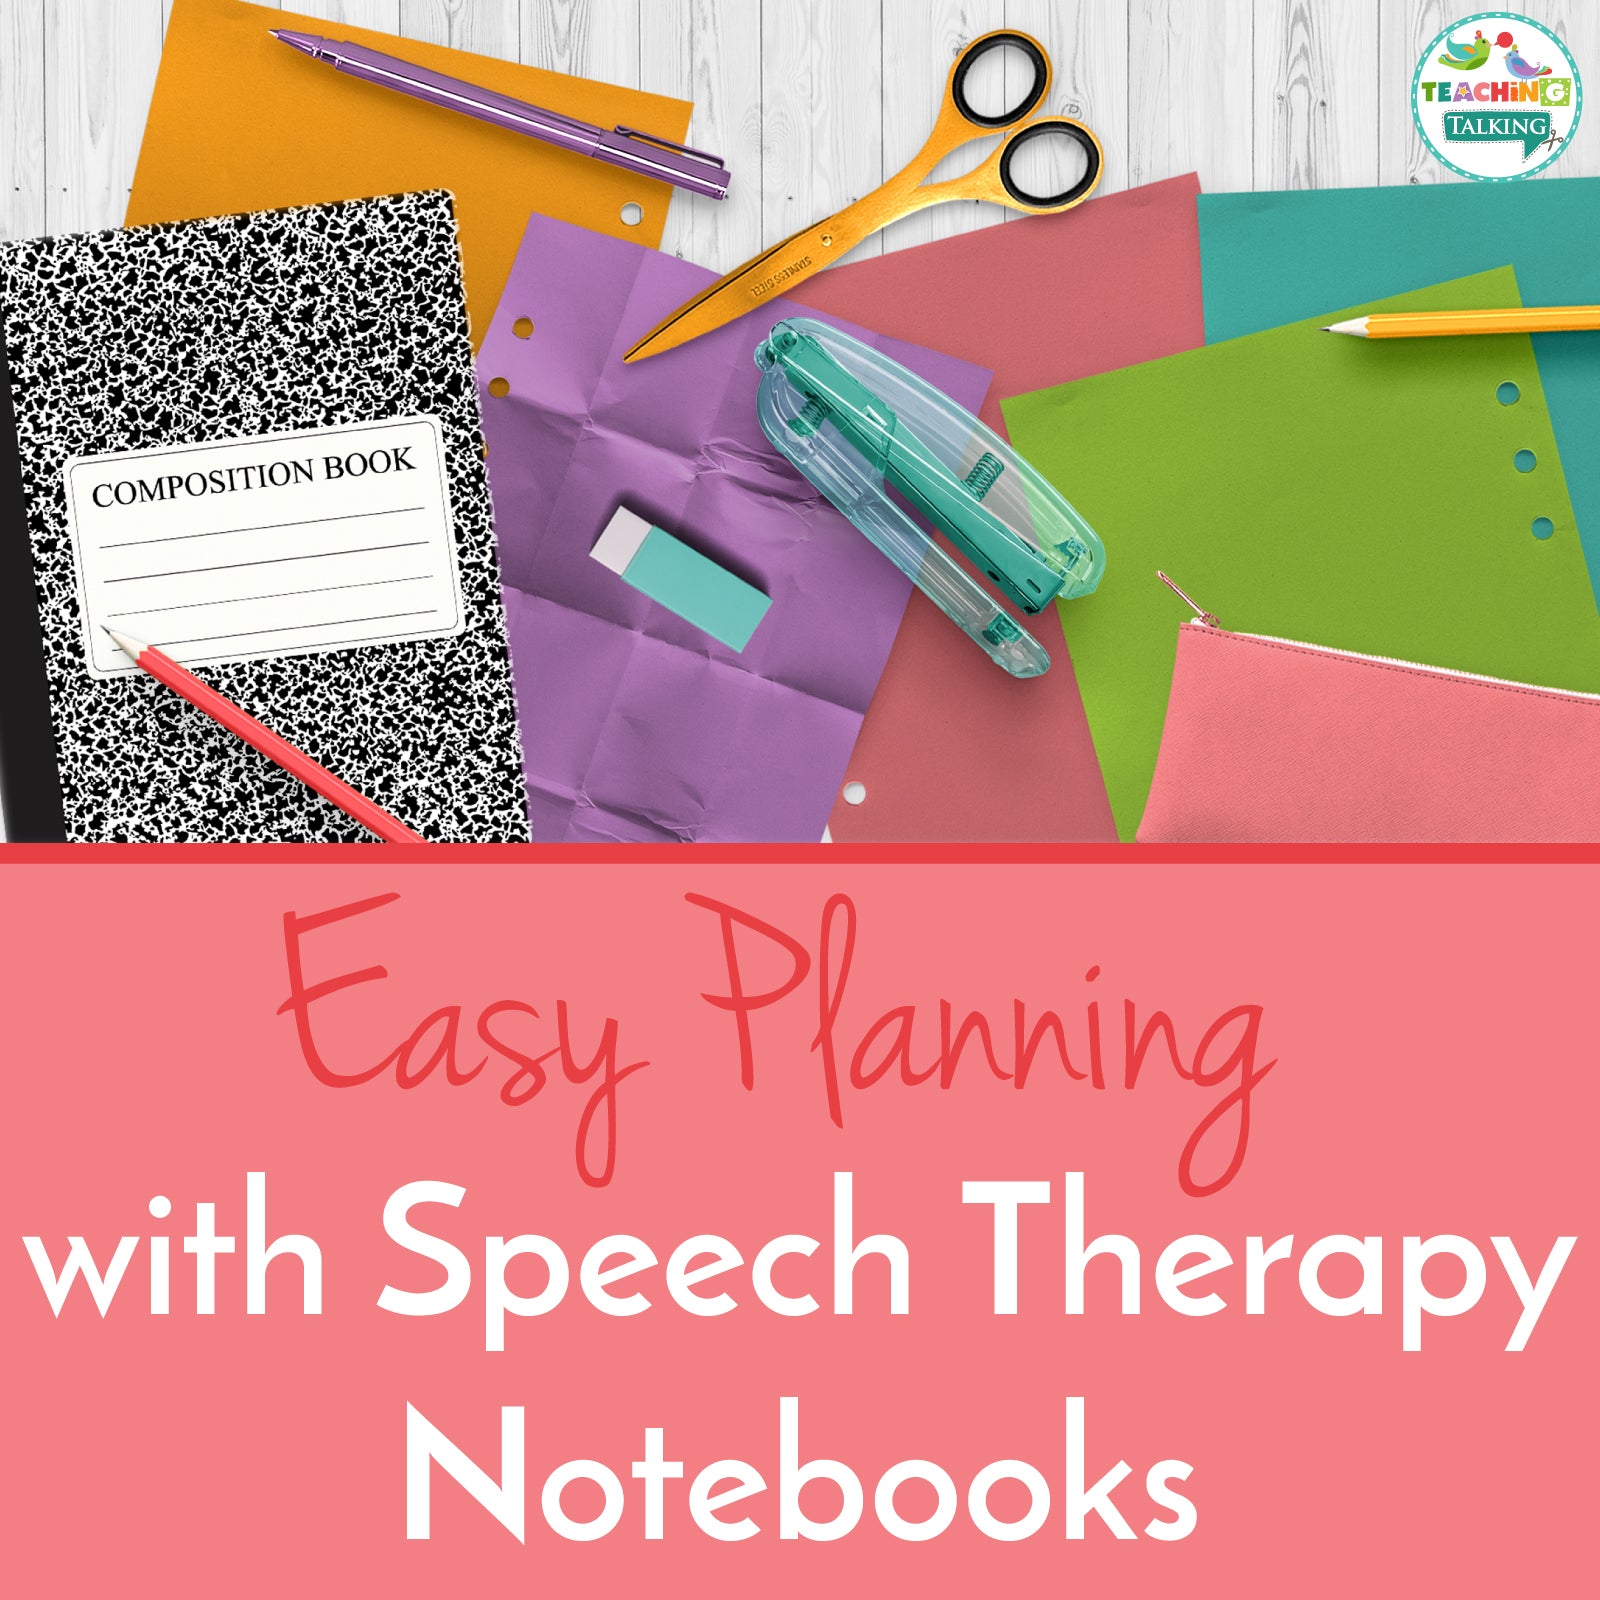 What are Speech Therapy Notebook Benefits? Find Out Here!